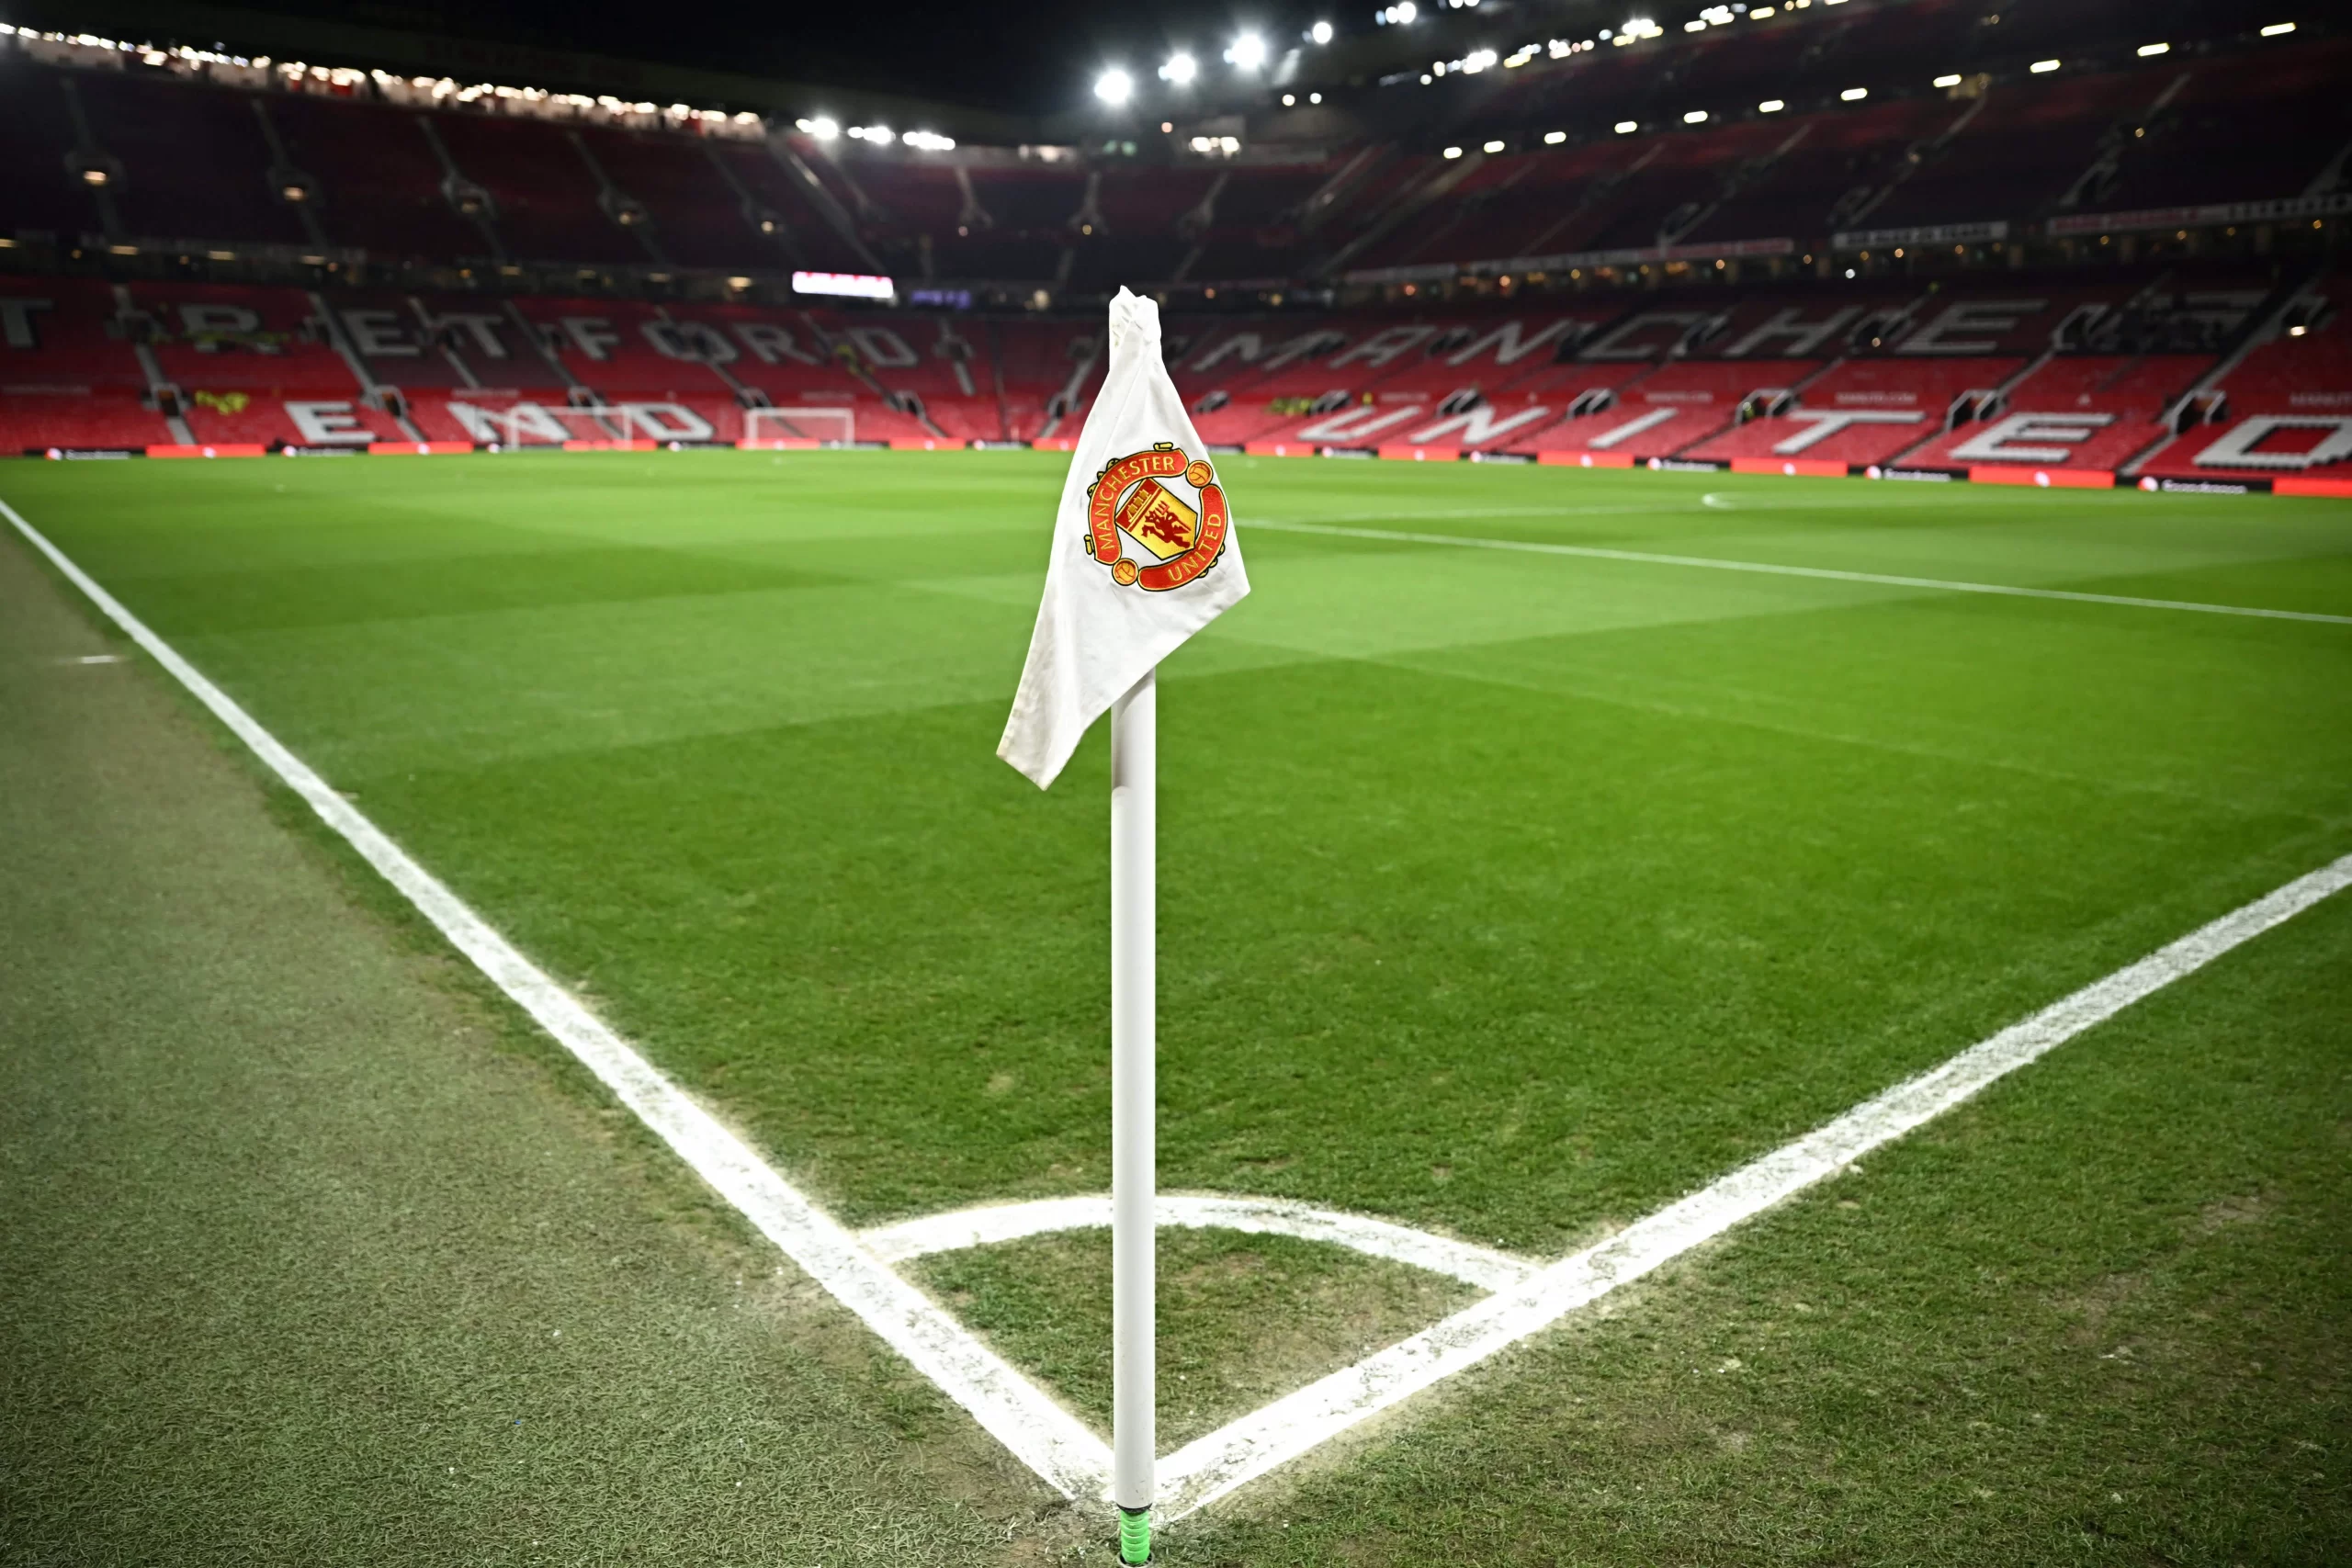 A doping ban might just spell the end of a former Manchester United star's career.